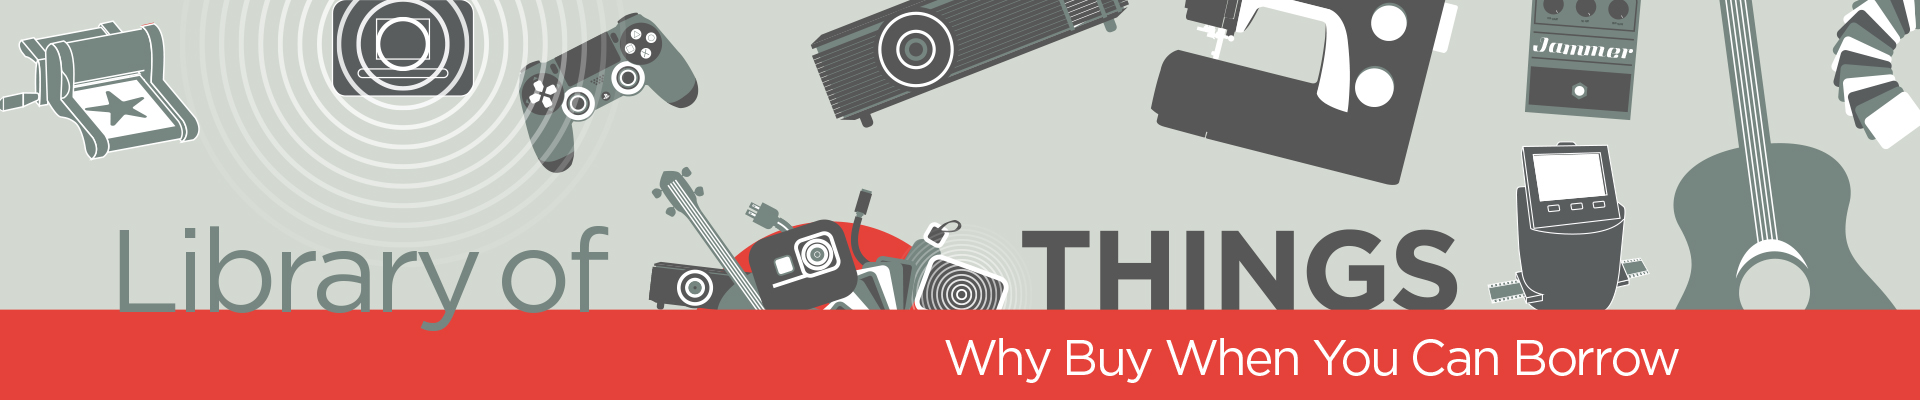 Library of Things: Why Buy When You Can Borrow